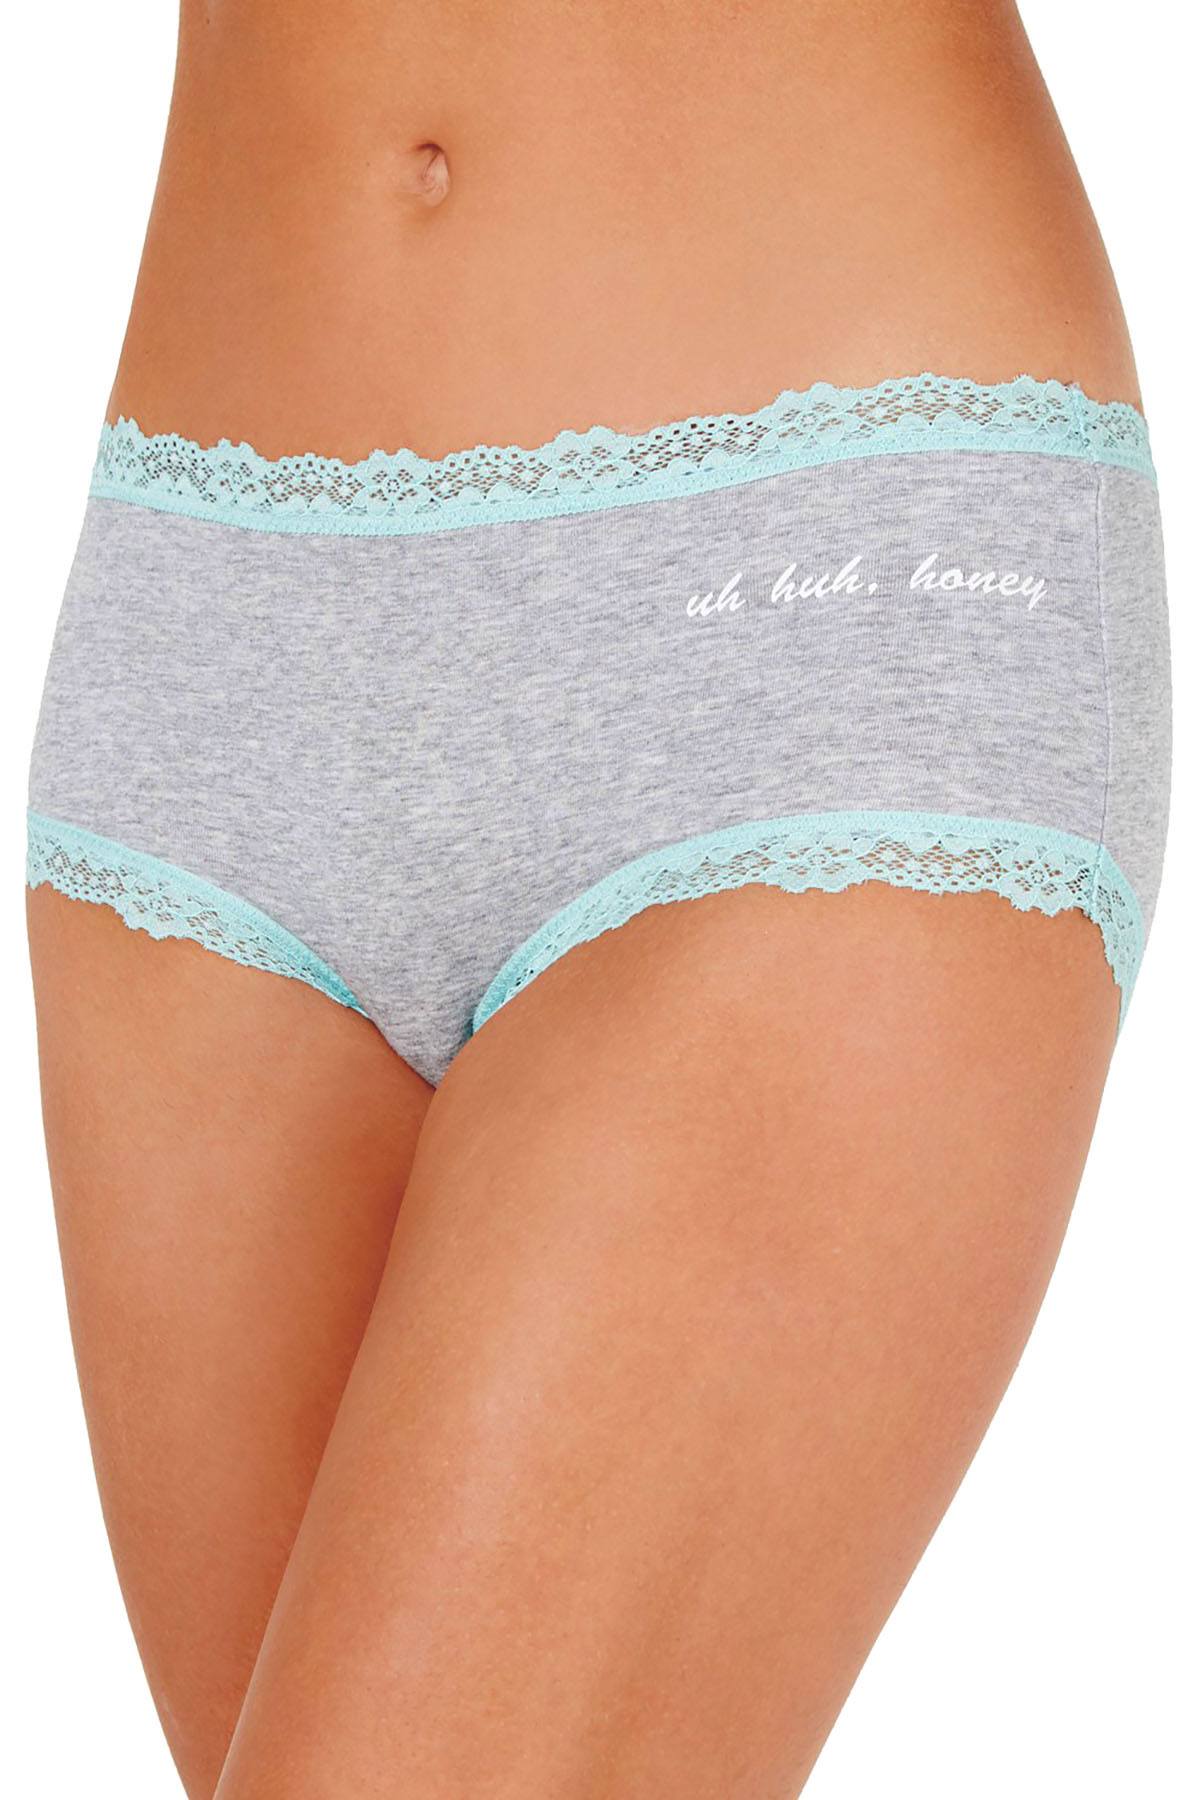 Jenni Lace Trim Hipster in Uh Huh Honey Grey